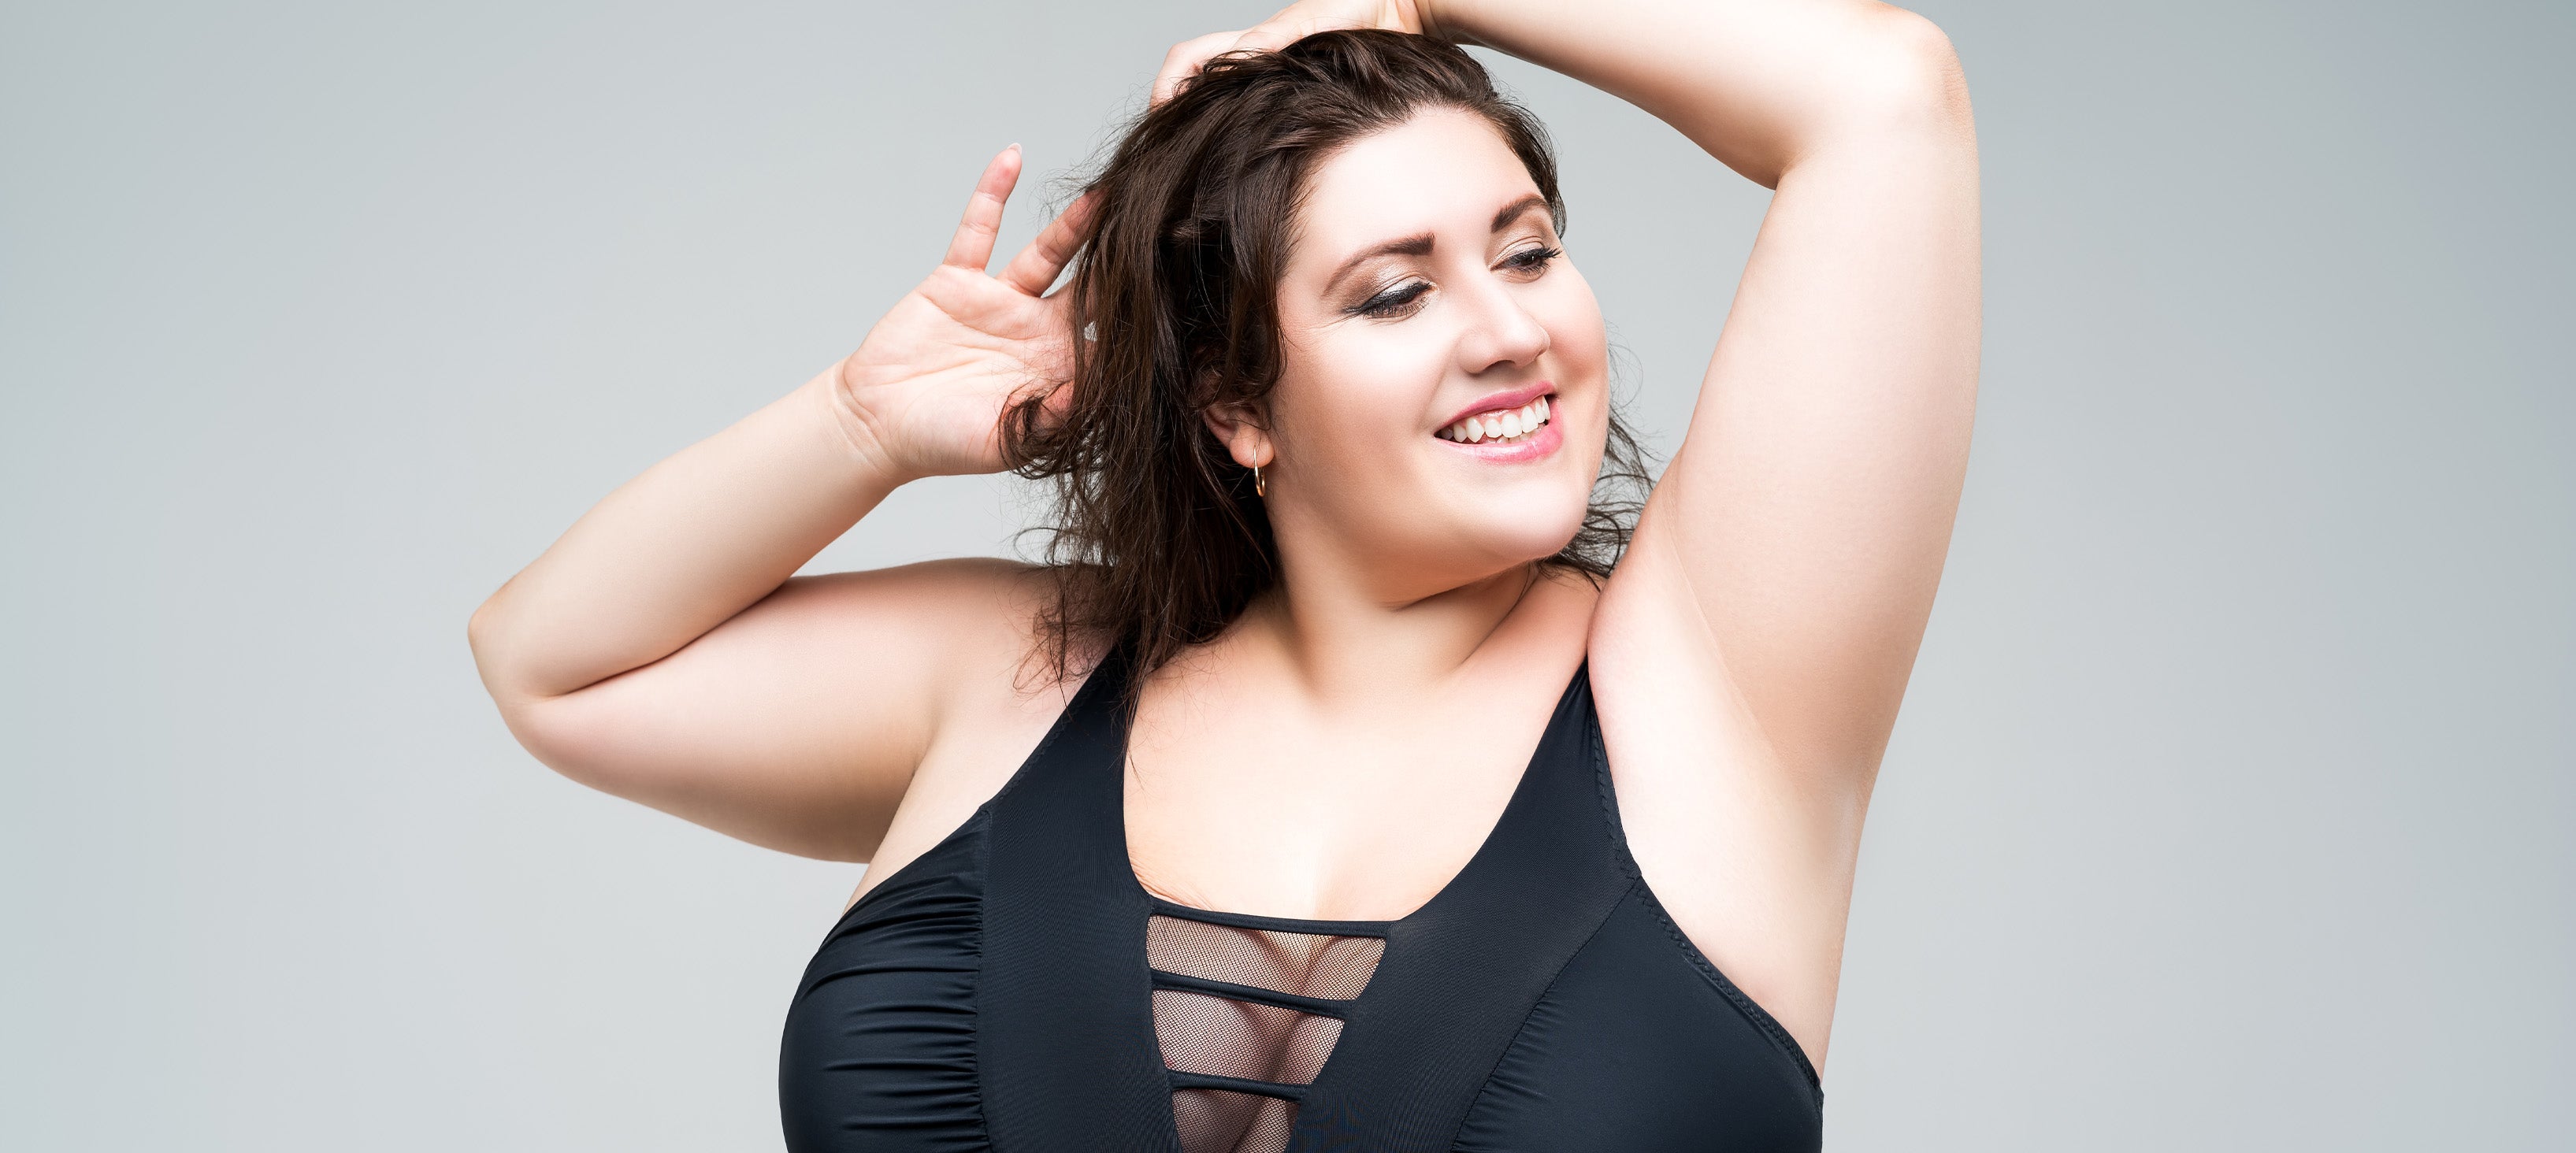 The Most Important Things You Should Know About Shapewear – Vy's